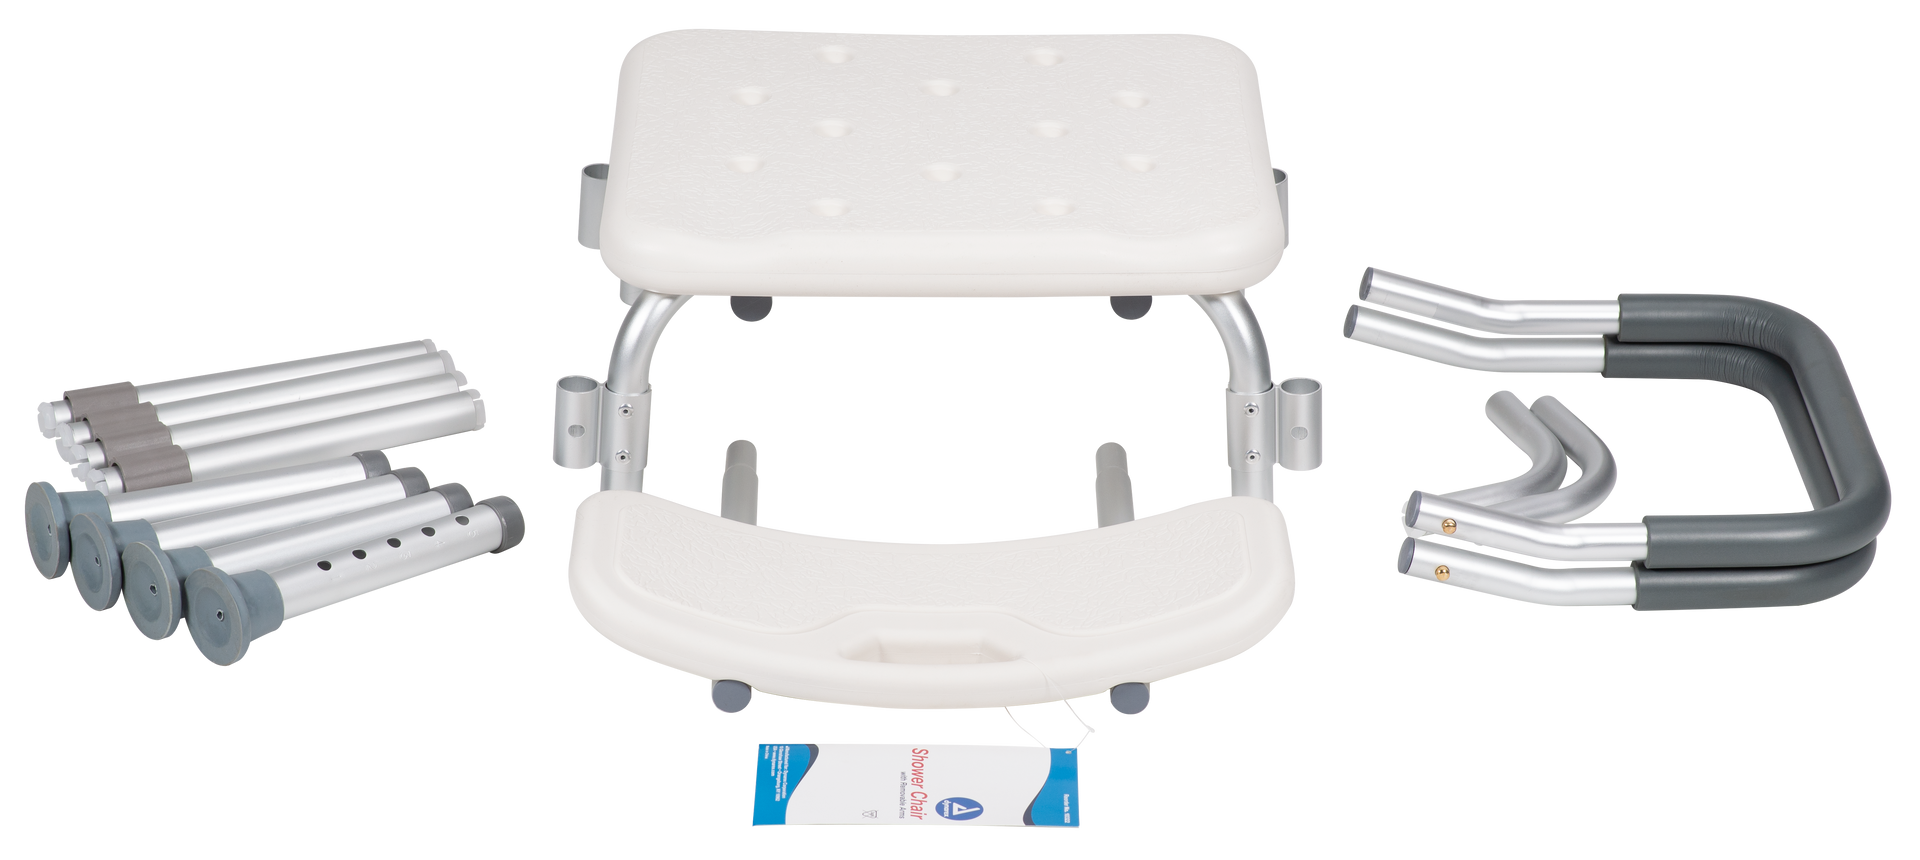 Dynarex Shower Chair with Removable Back and Padded Arms - Senior.com Shower Chairs